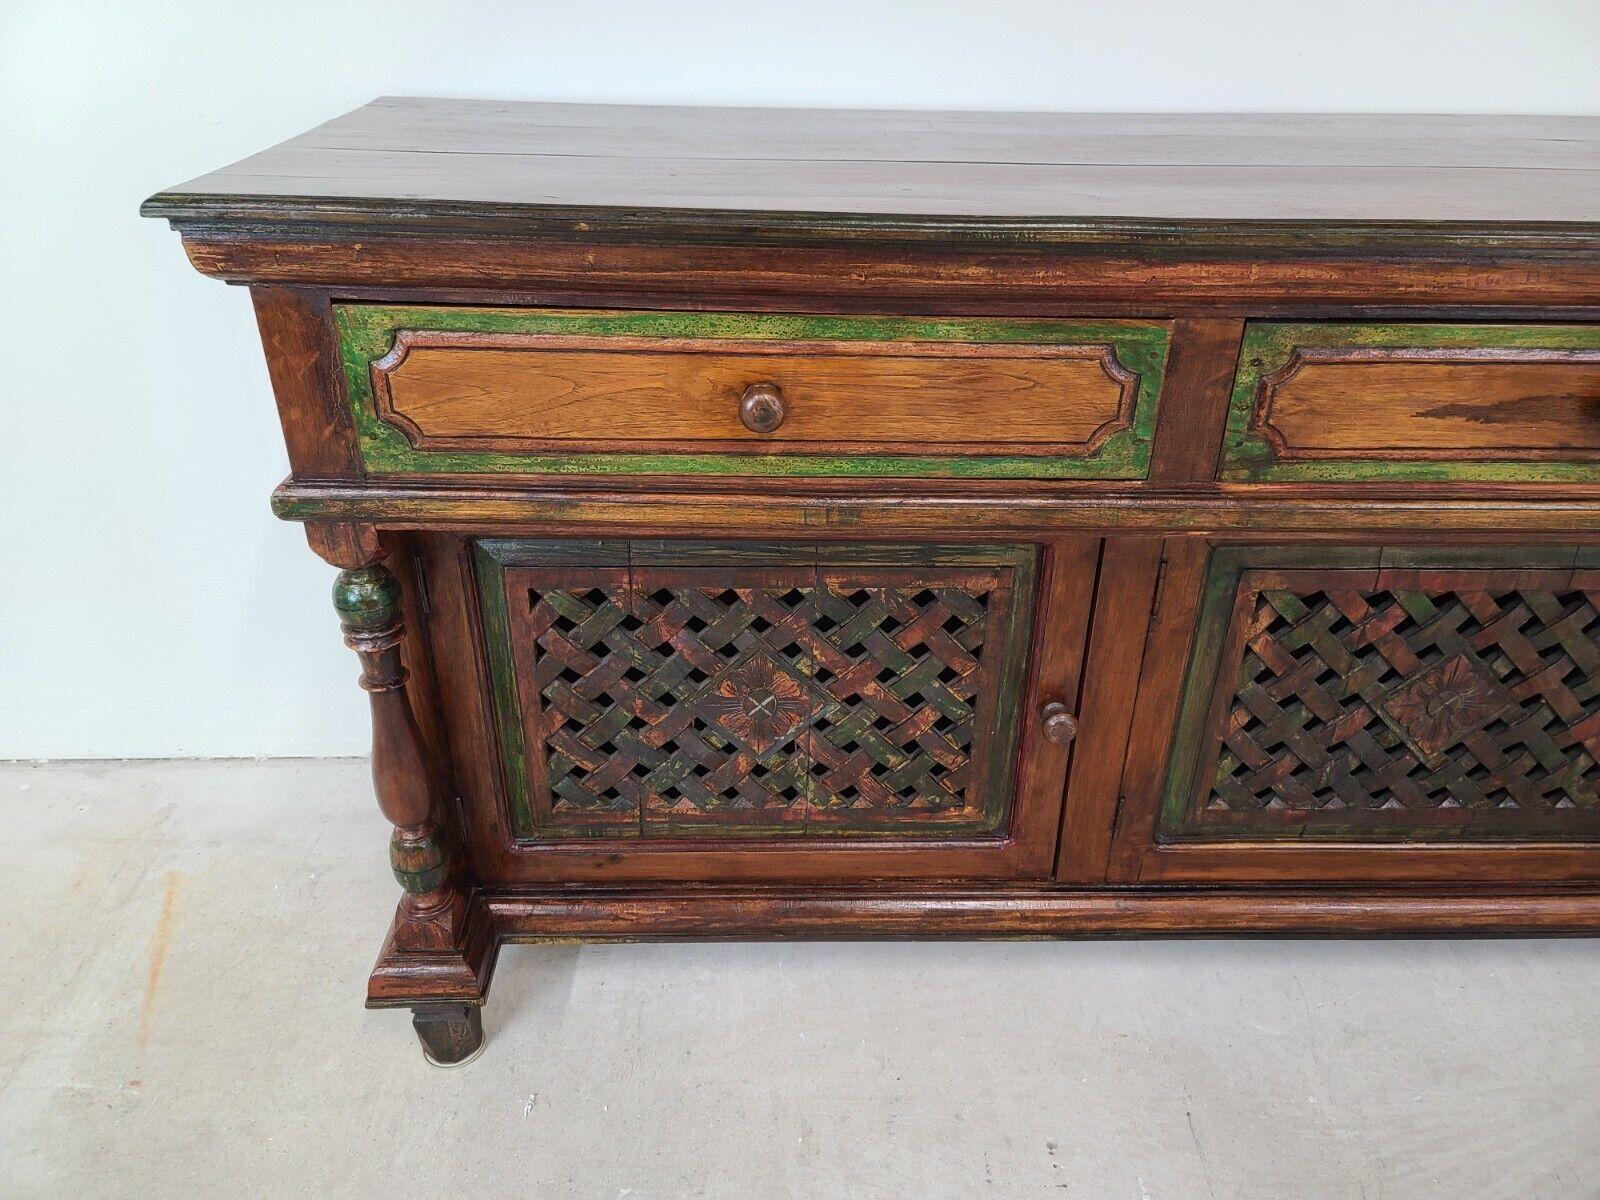 For FULL item description be sure to click on CONTINUE READING at the bottom of this listing.

Offering One Of Our Recent Palm Beach Estate Fine Furniture Acquisitions Of An 
Antique Early 1900s French Country Credenza Bar Sideboard
All the